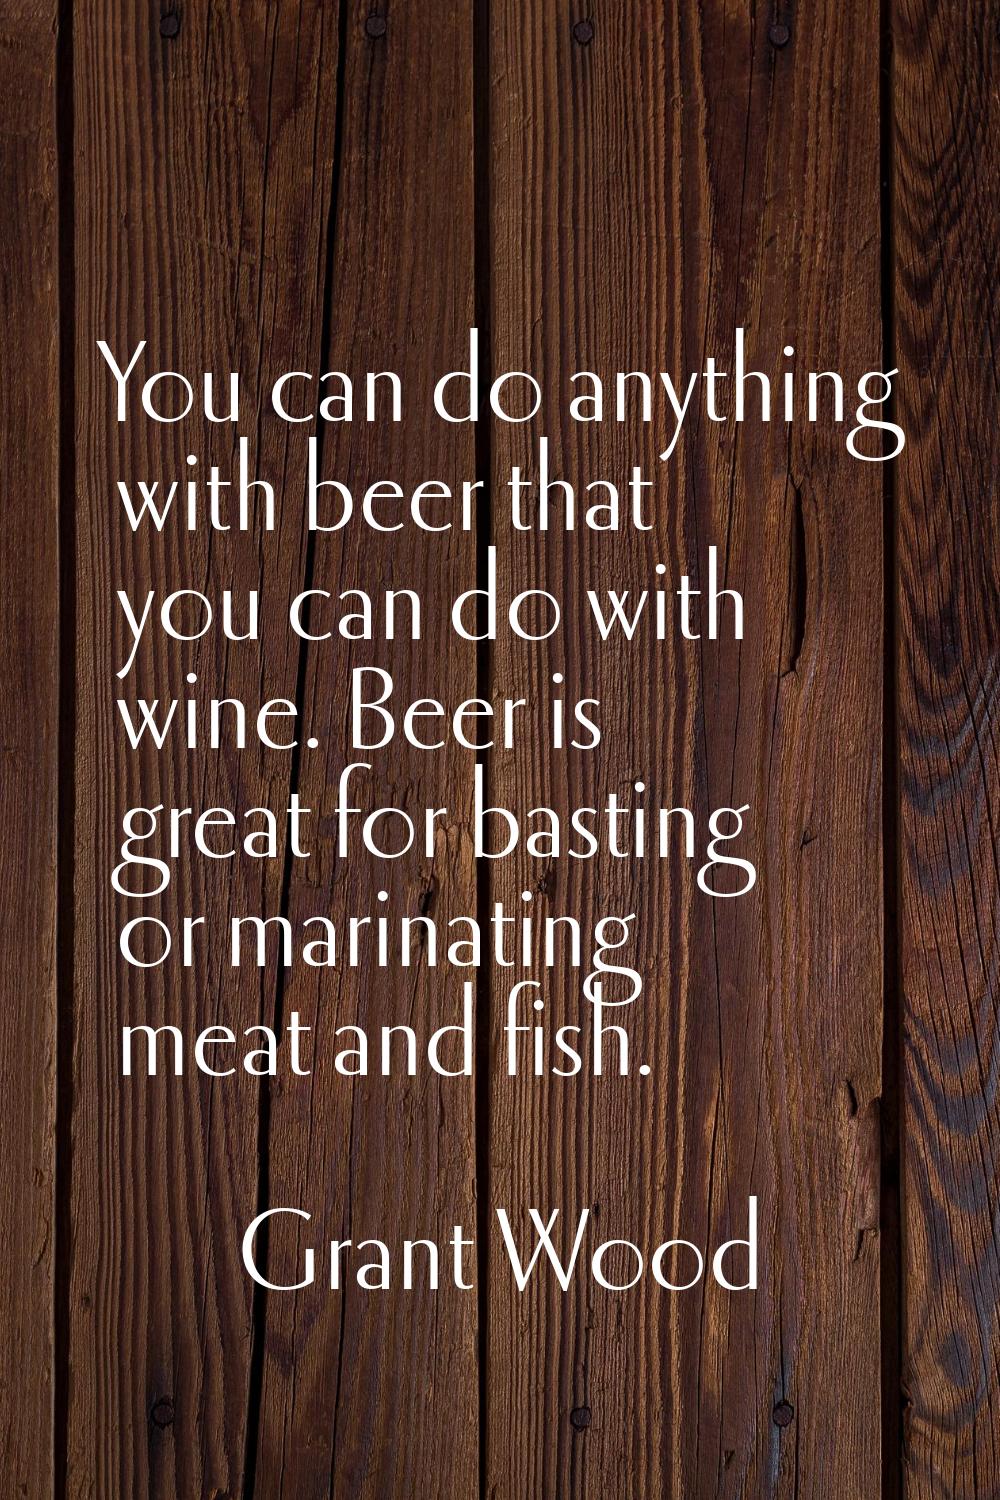 You can do anything with beer that you can do with wine. Beer is great for basting or marinating me